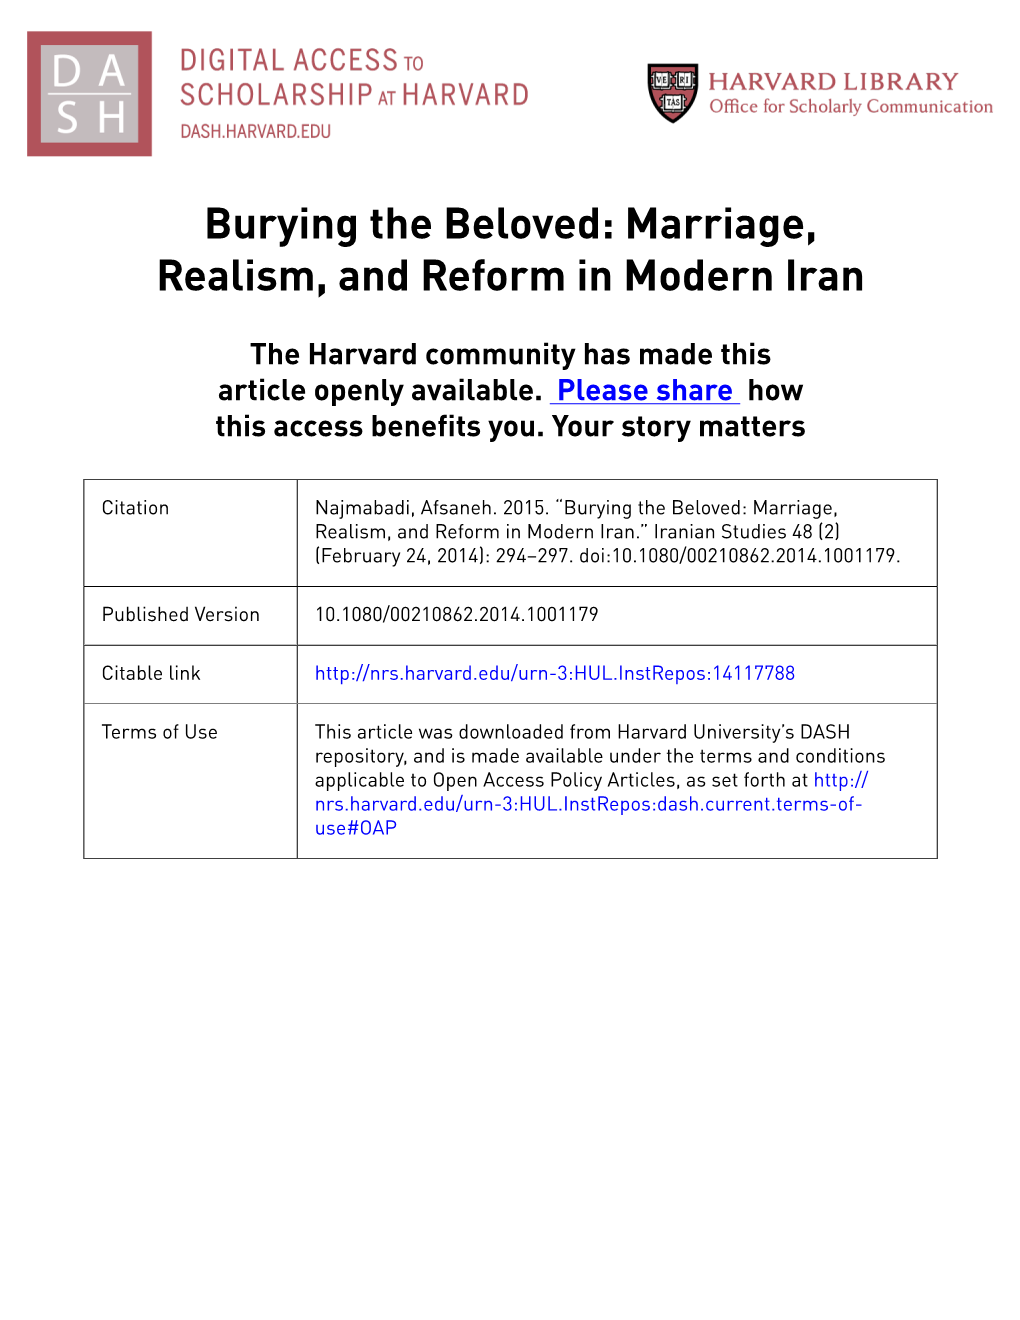 Burying the Beloved: Marriage, Realism, and Reform in Modern Iran